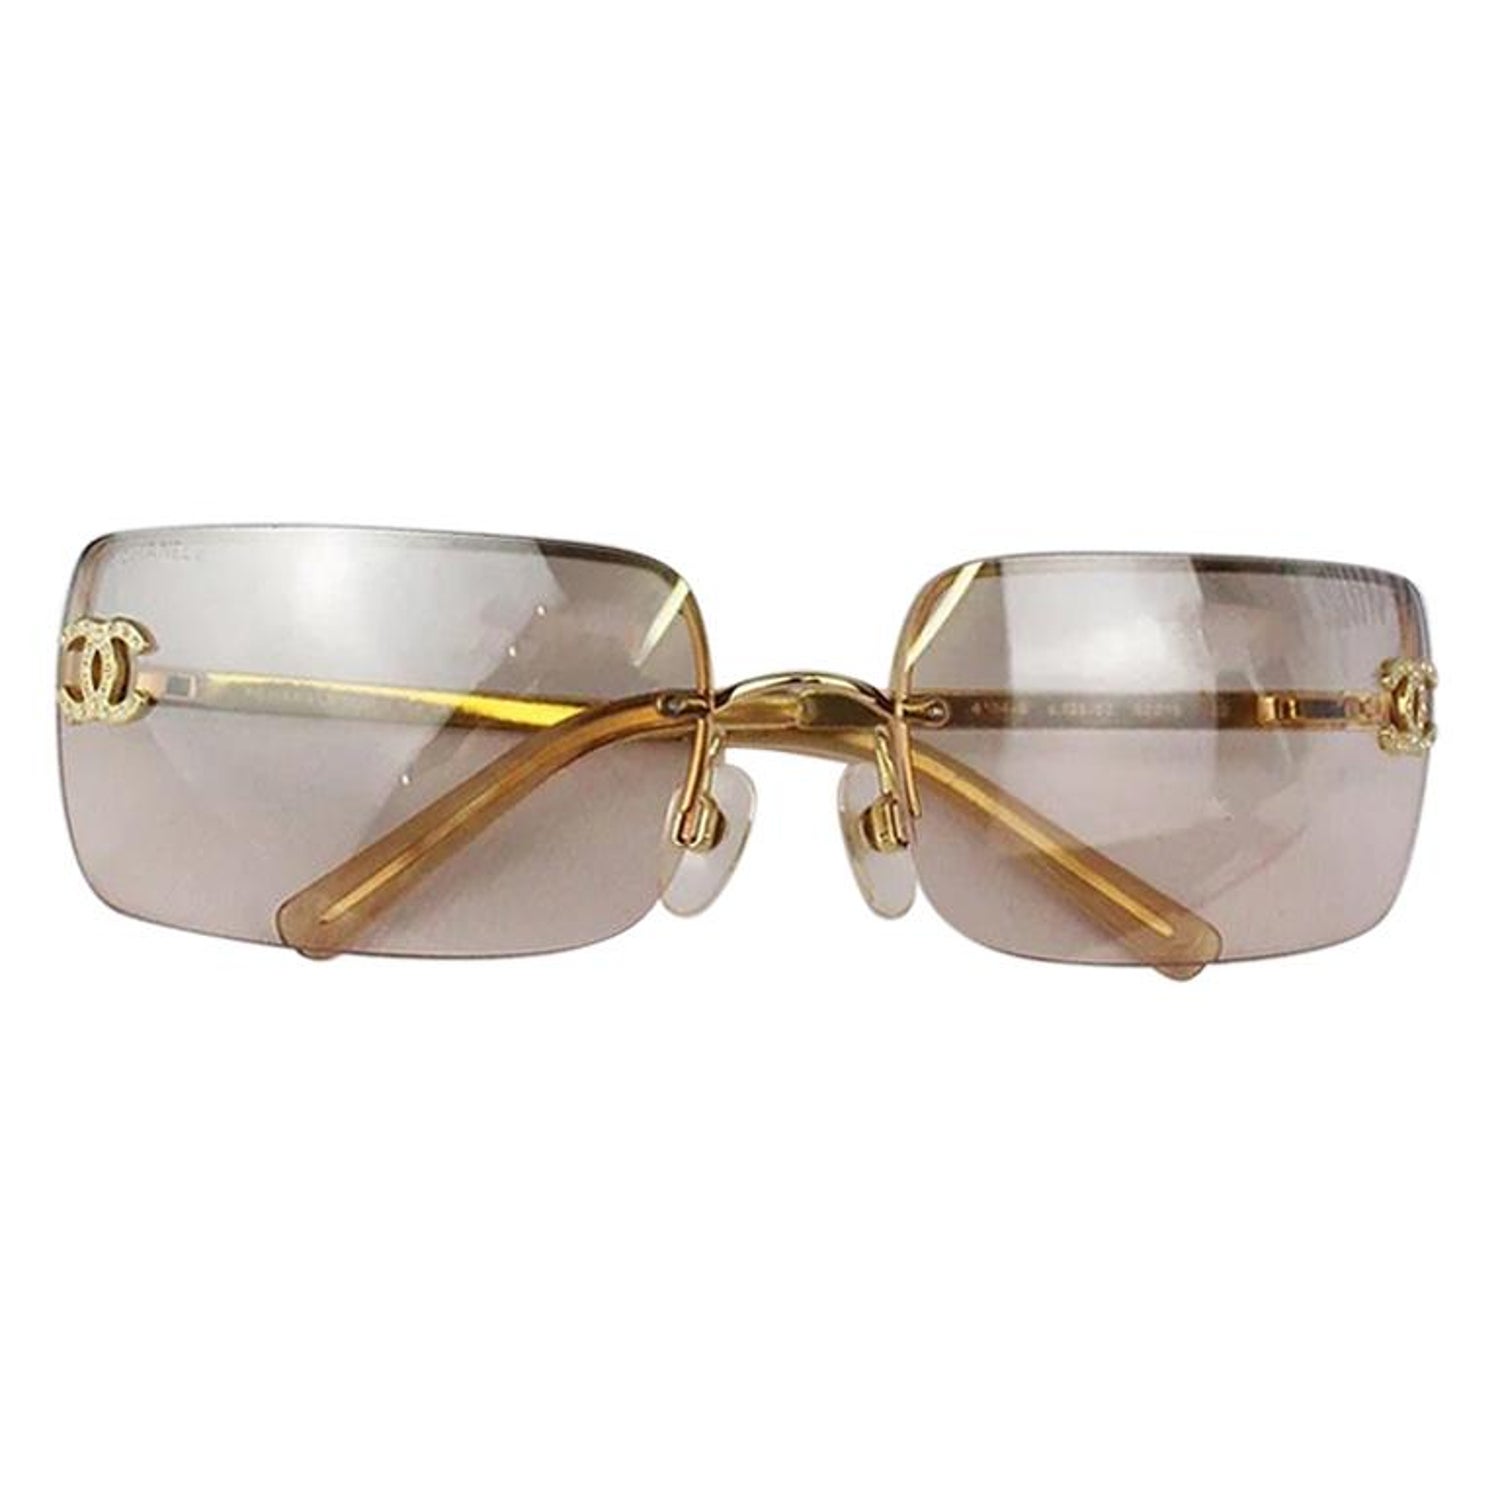 Chanel Rimless - 7 For Sale on 1stDibs | chanel rimless sunglasses, rimless  chanel sunglasses, chanel sunglasses rimless